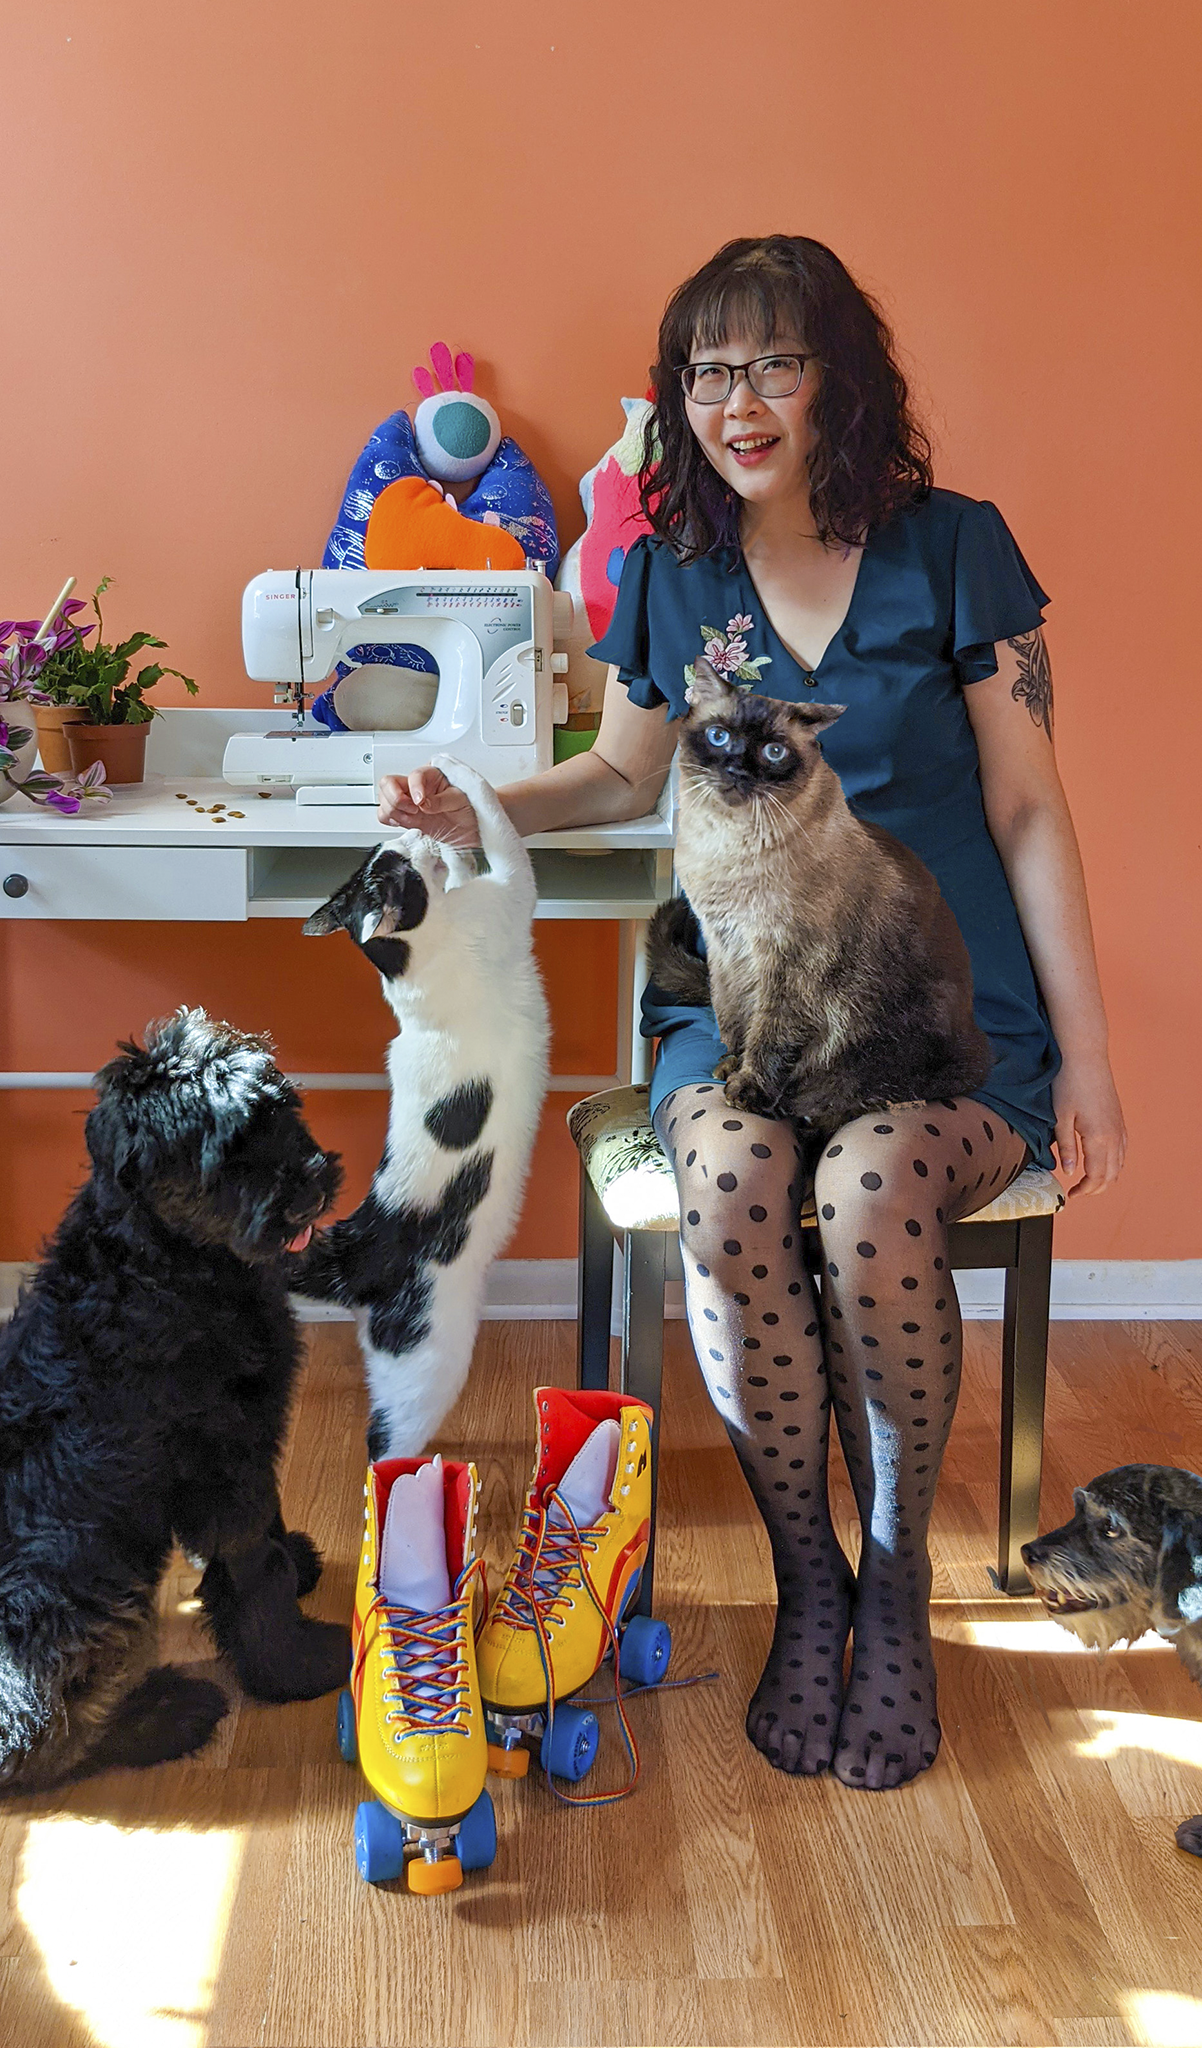 Hanna Lee at sewing machine with two cats and a dog